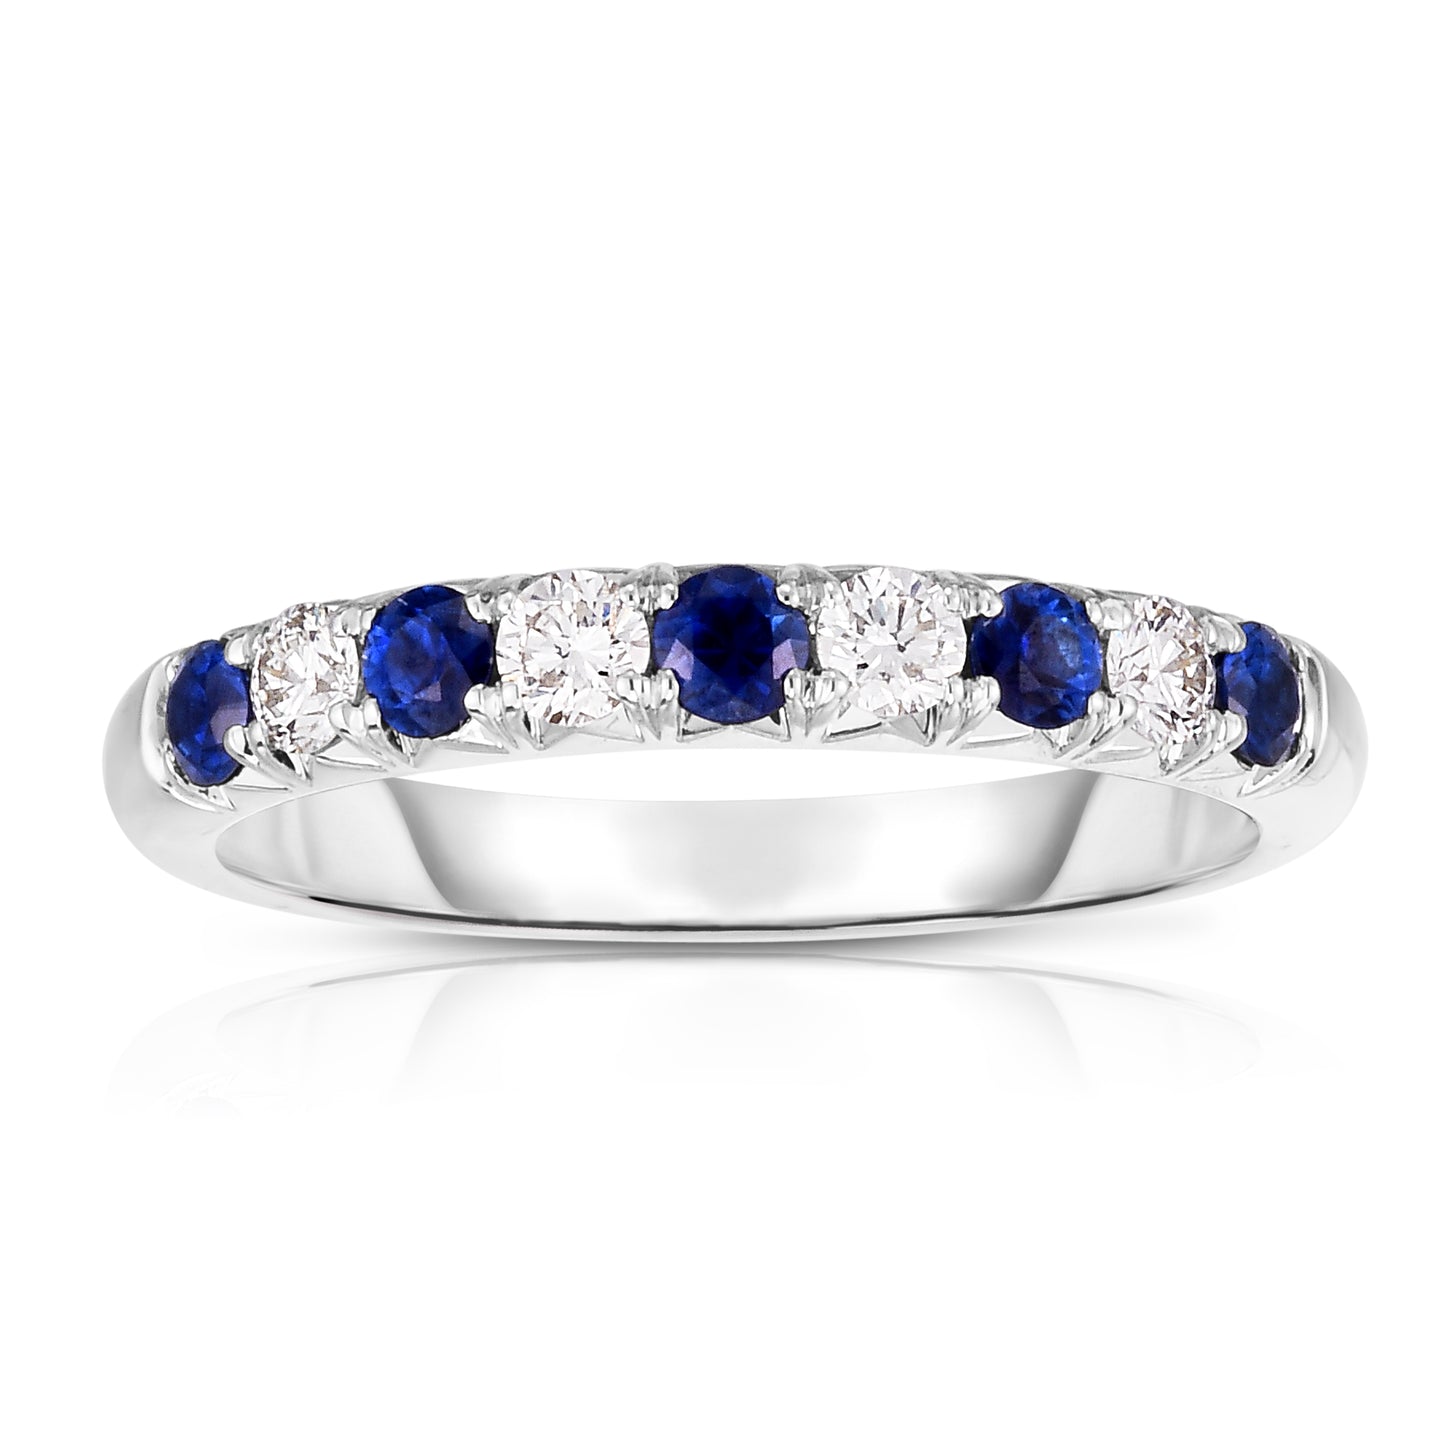 9-Stone French Cut Band with Alternating Blue Sapphire & Diamonds